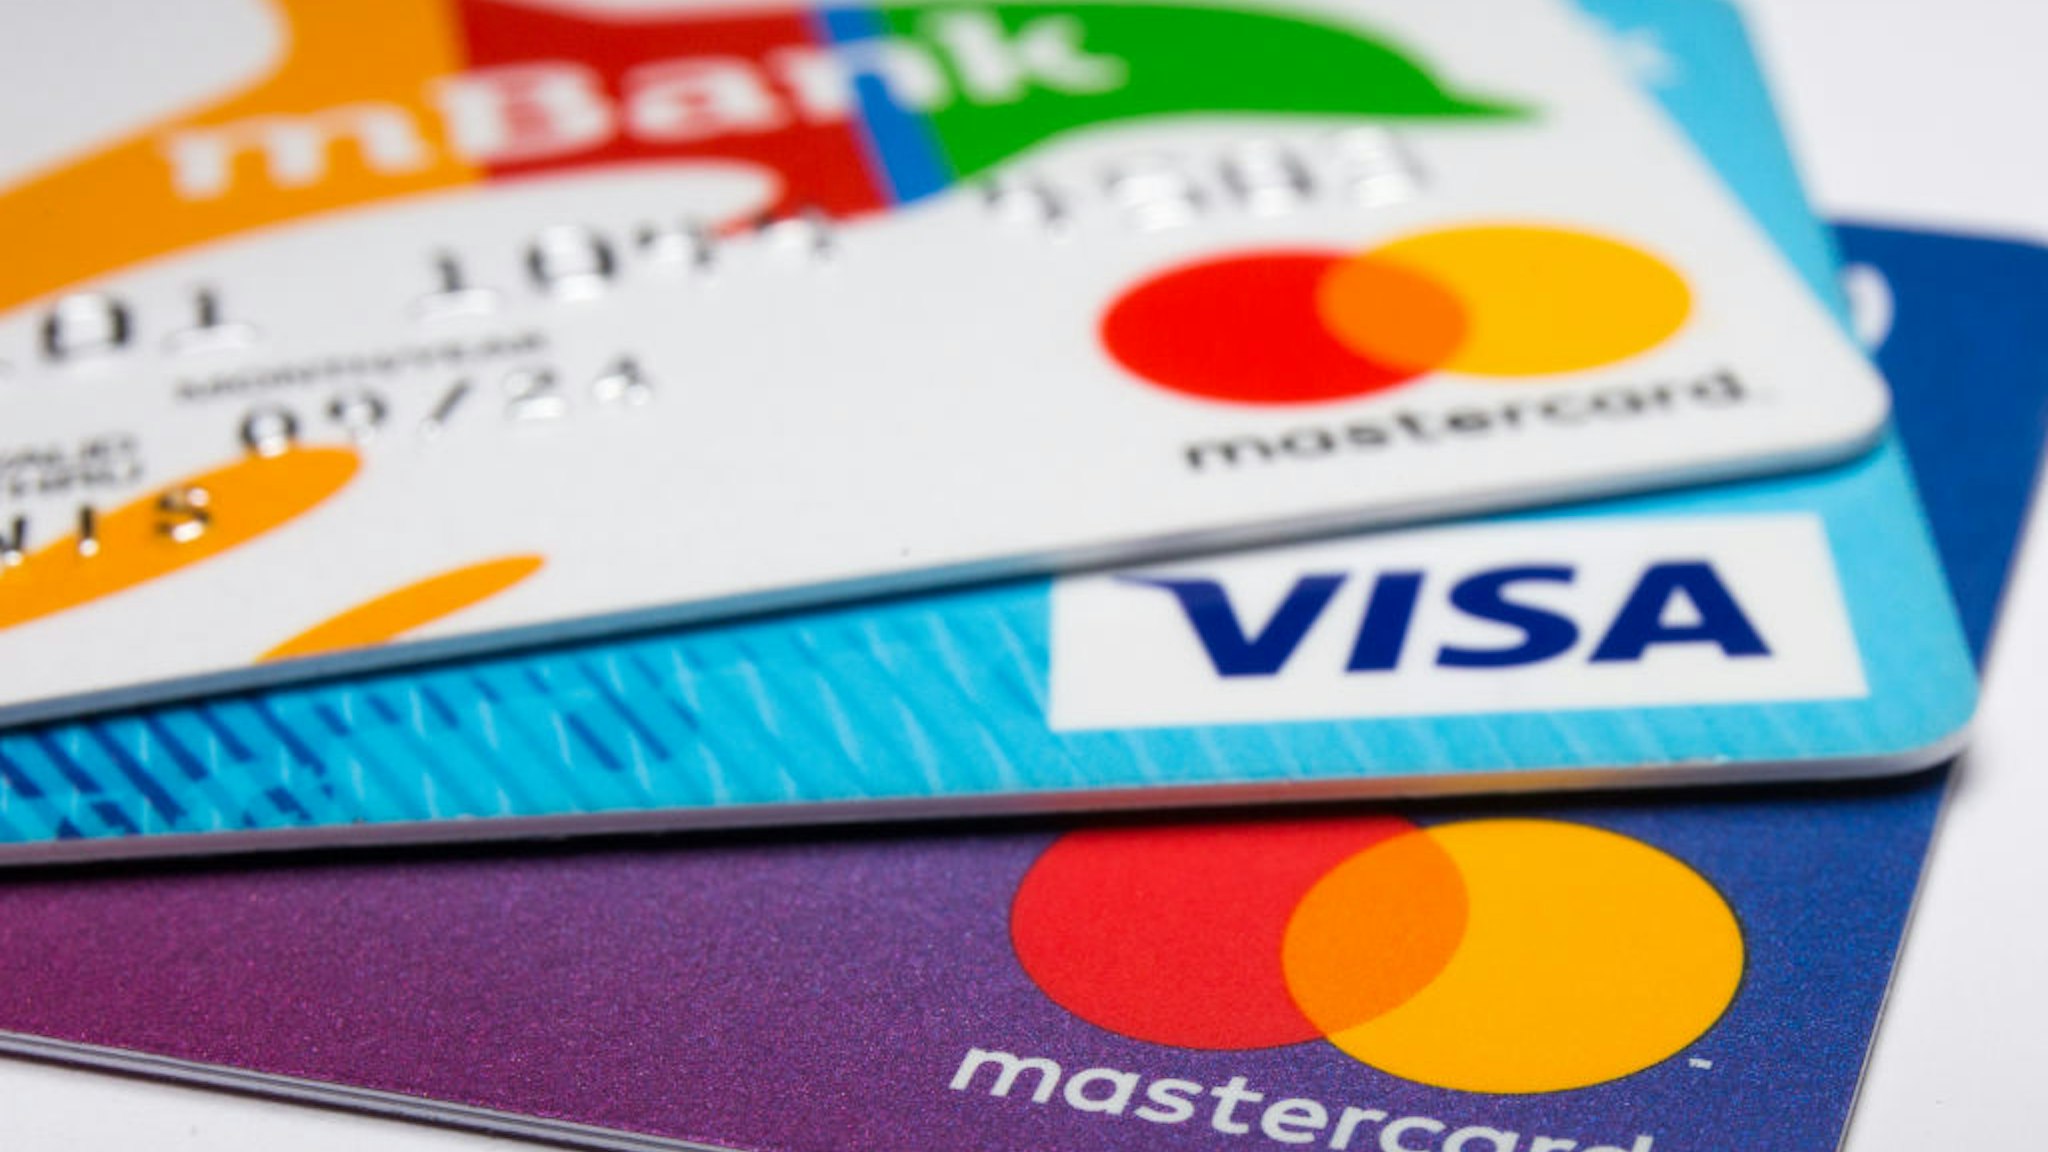 OLAND - 2020/01/03: In this photo illustration a Visa credit card and Mastercard debit cards are seen displayed. (Photo Illustration by Karol Serewis/SOPA Images/LightRocket via Getty Images)